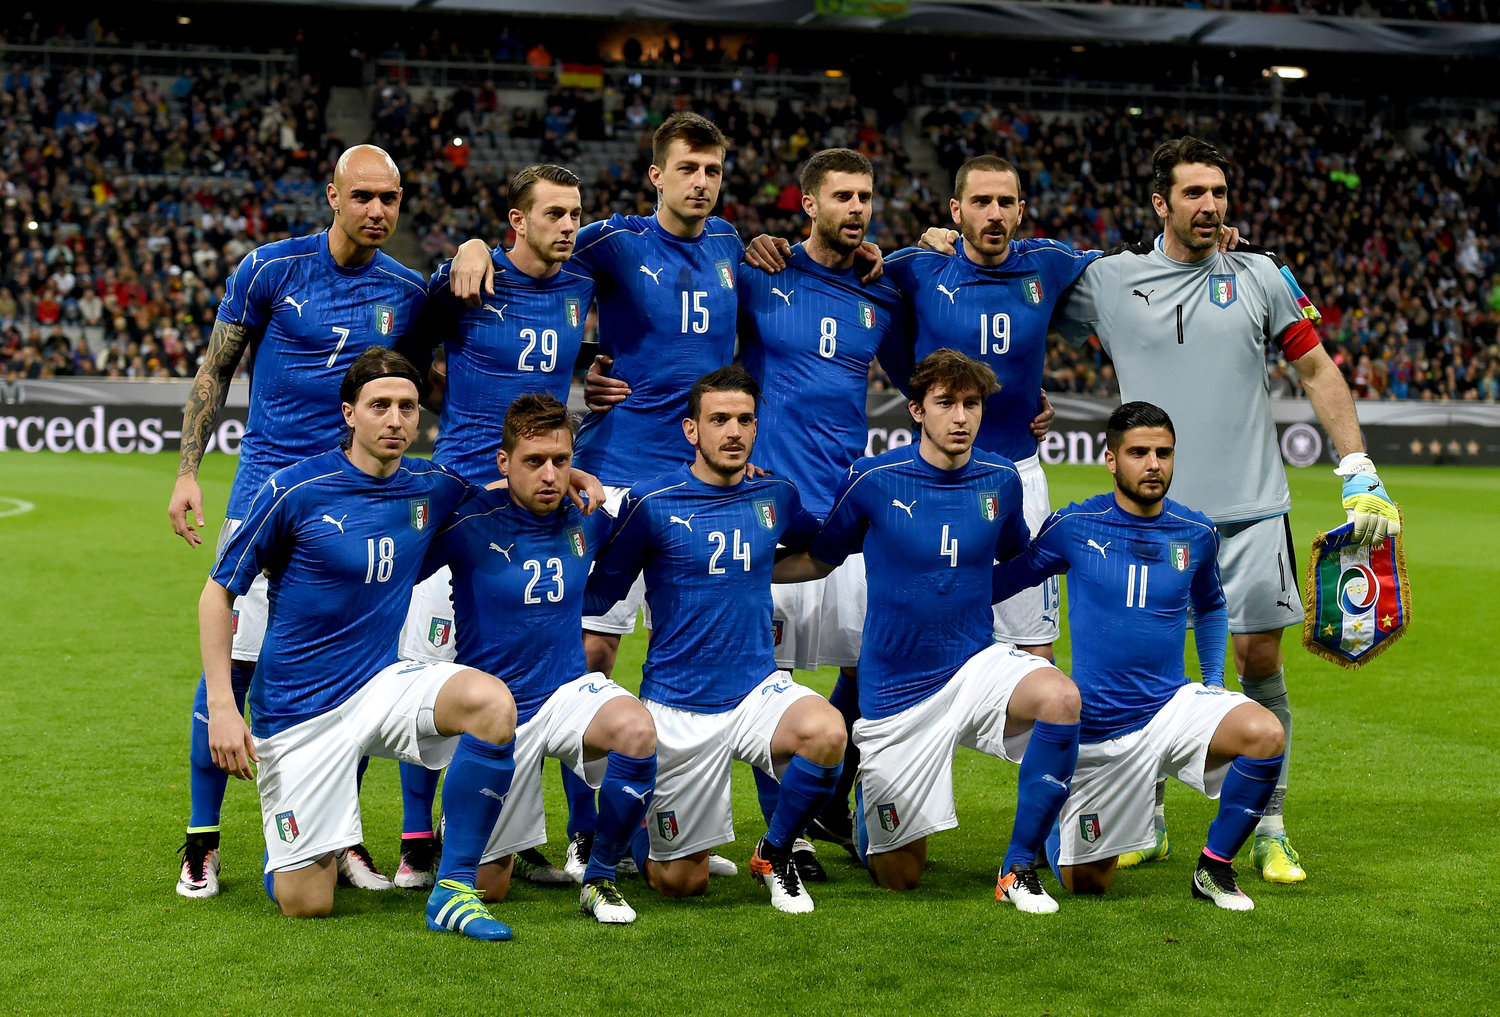 Italy pose for a photograph prior to the international friendly match between Germany and Italy at Allianz Arena. (Photo by Claudio Villa/Getty Images)